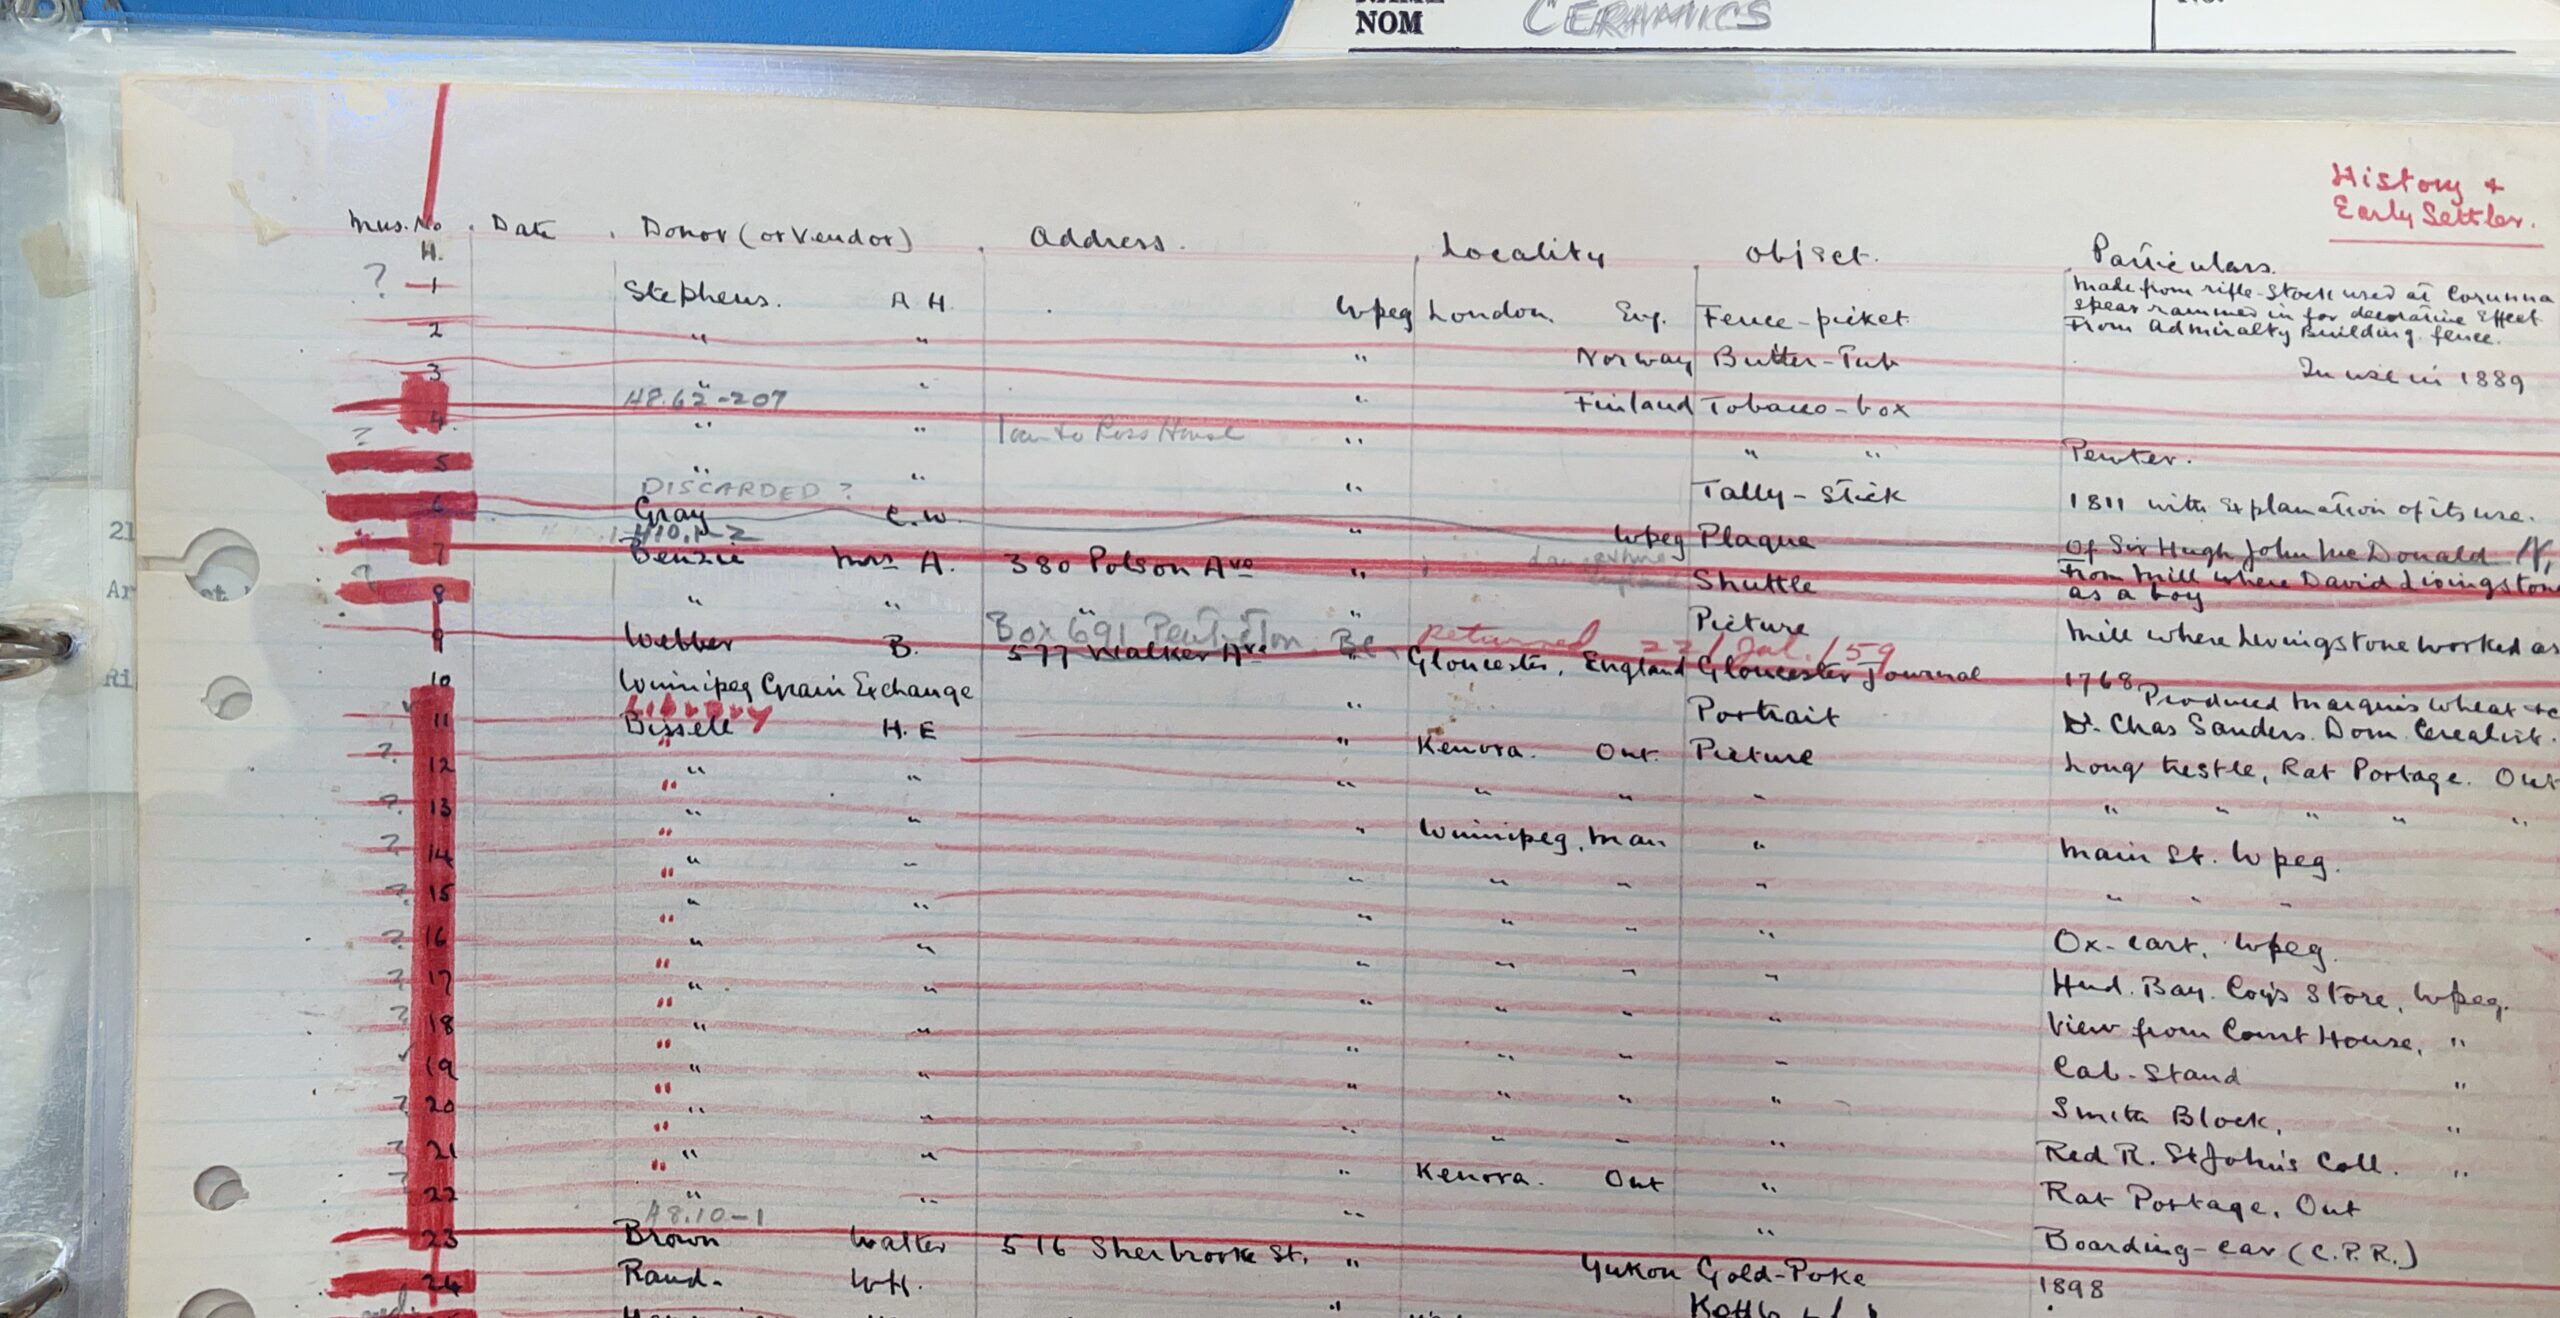 Image of an inventory page with multiple columns listing items and their descriptions. Most of the rows have been struck through with red ink. 